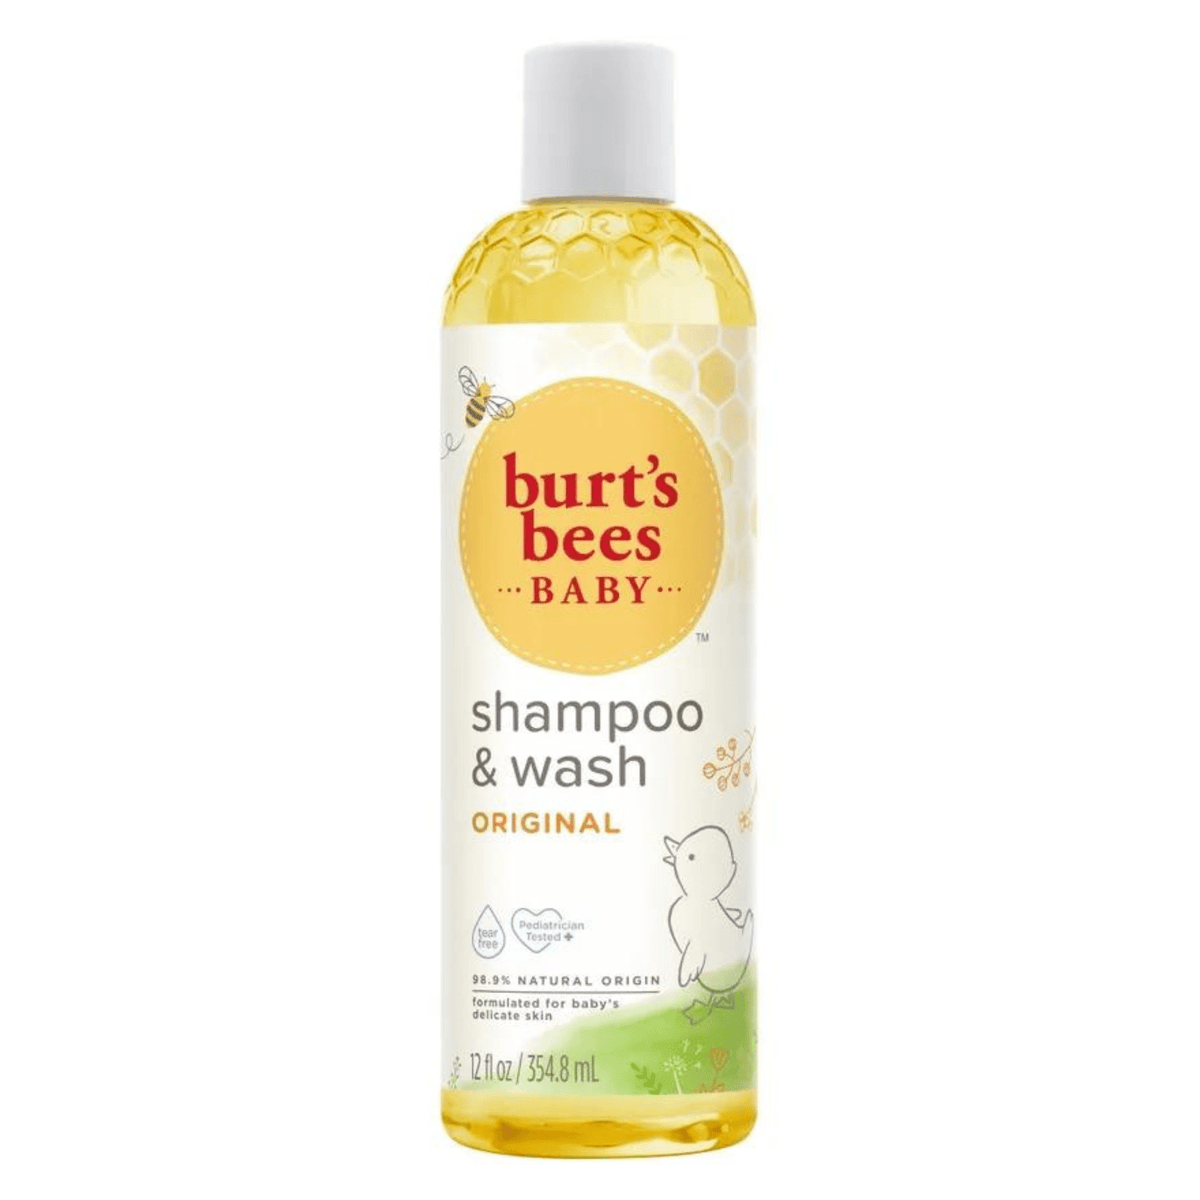 Primary Image of Baby Bee Shampoo and Body Wash